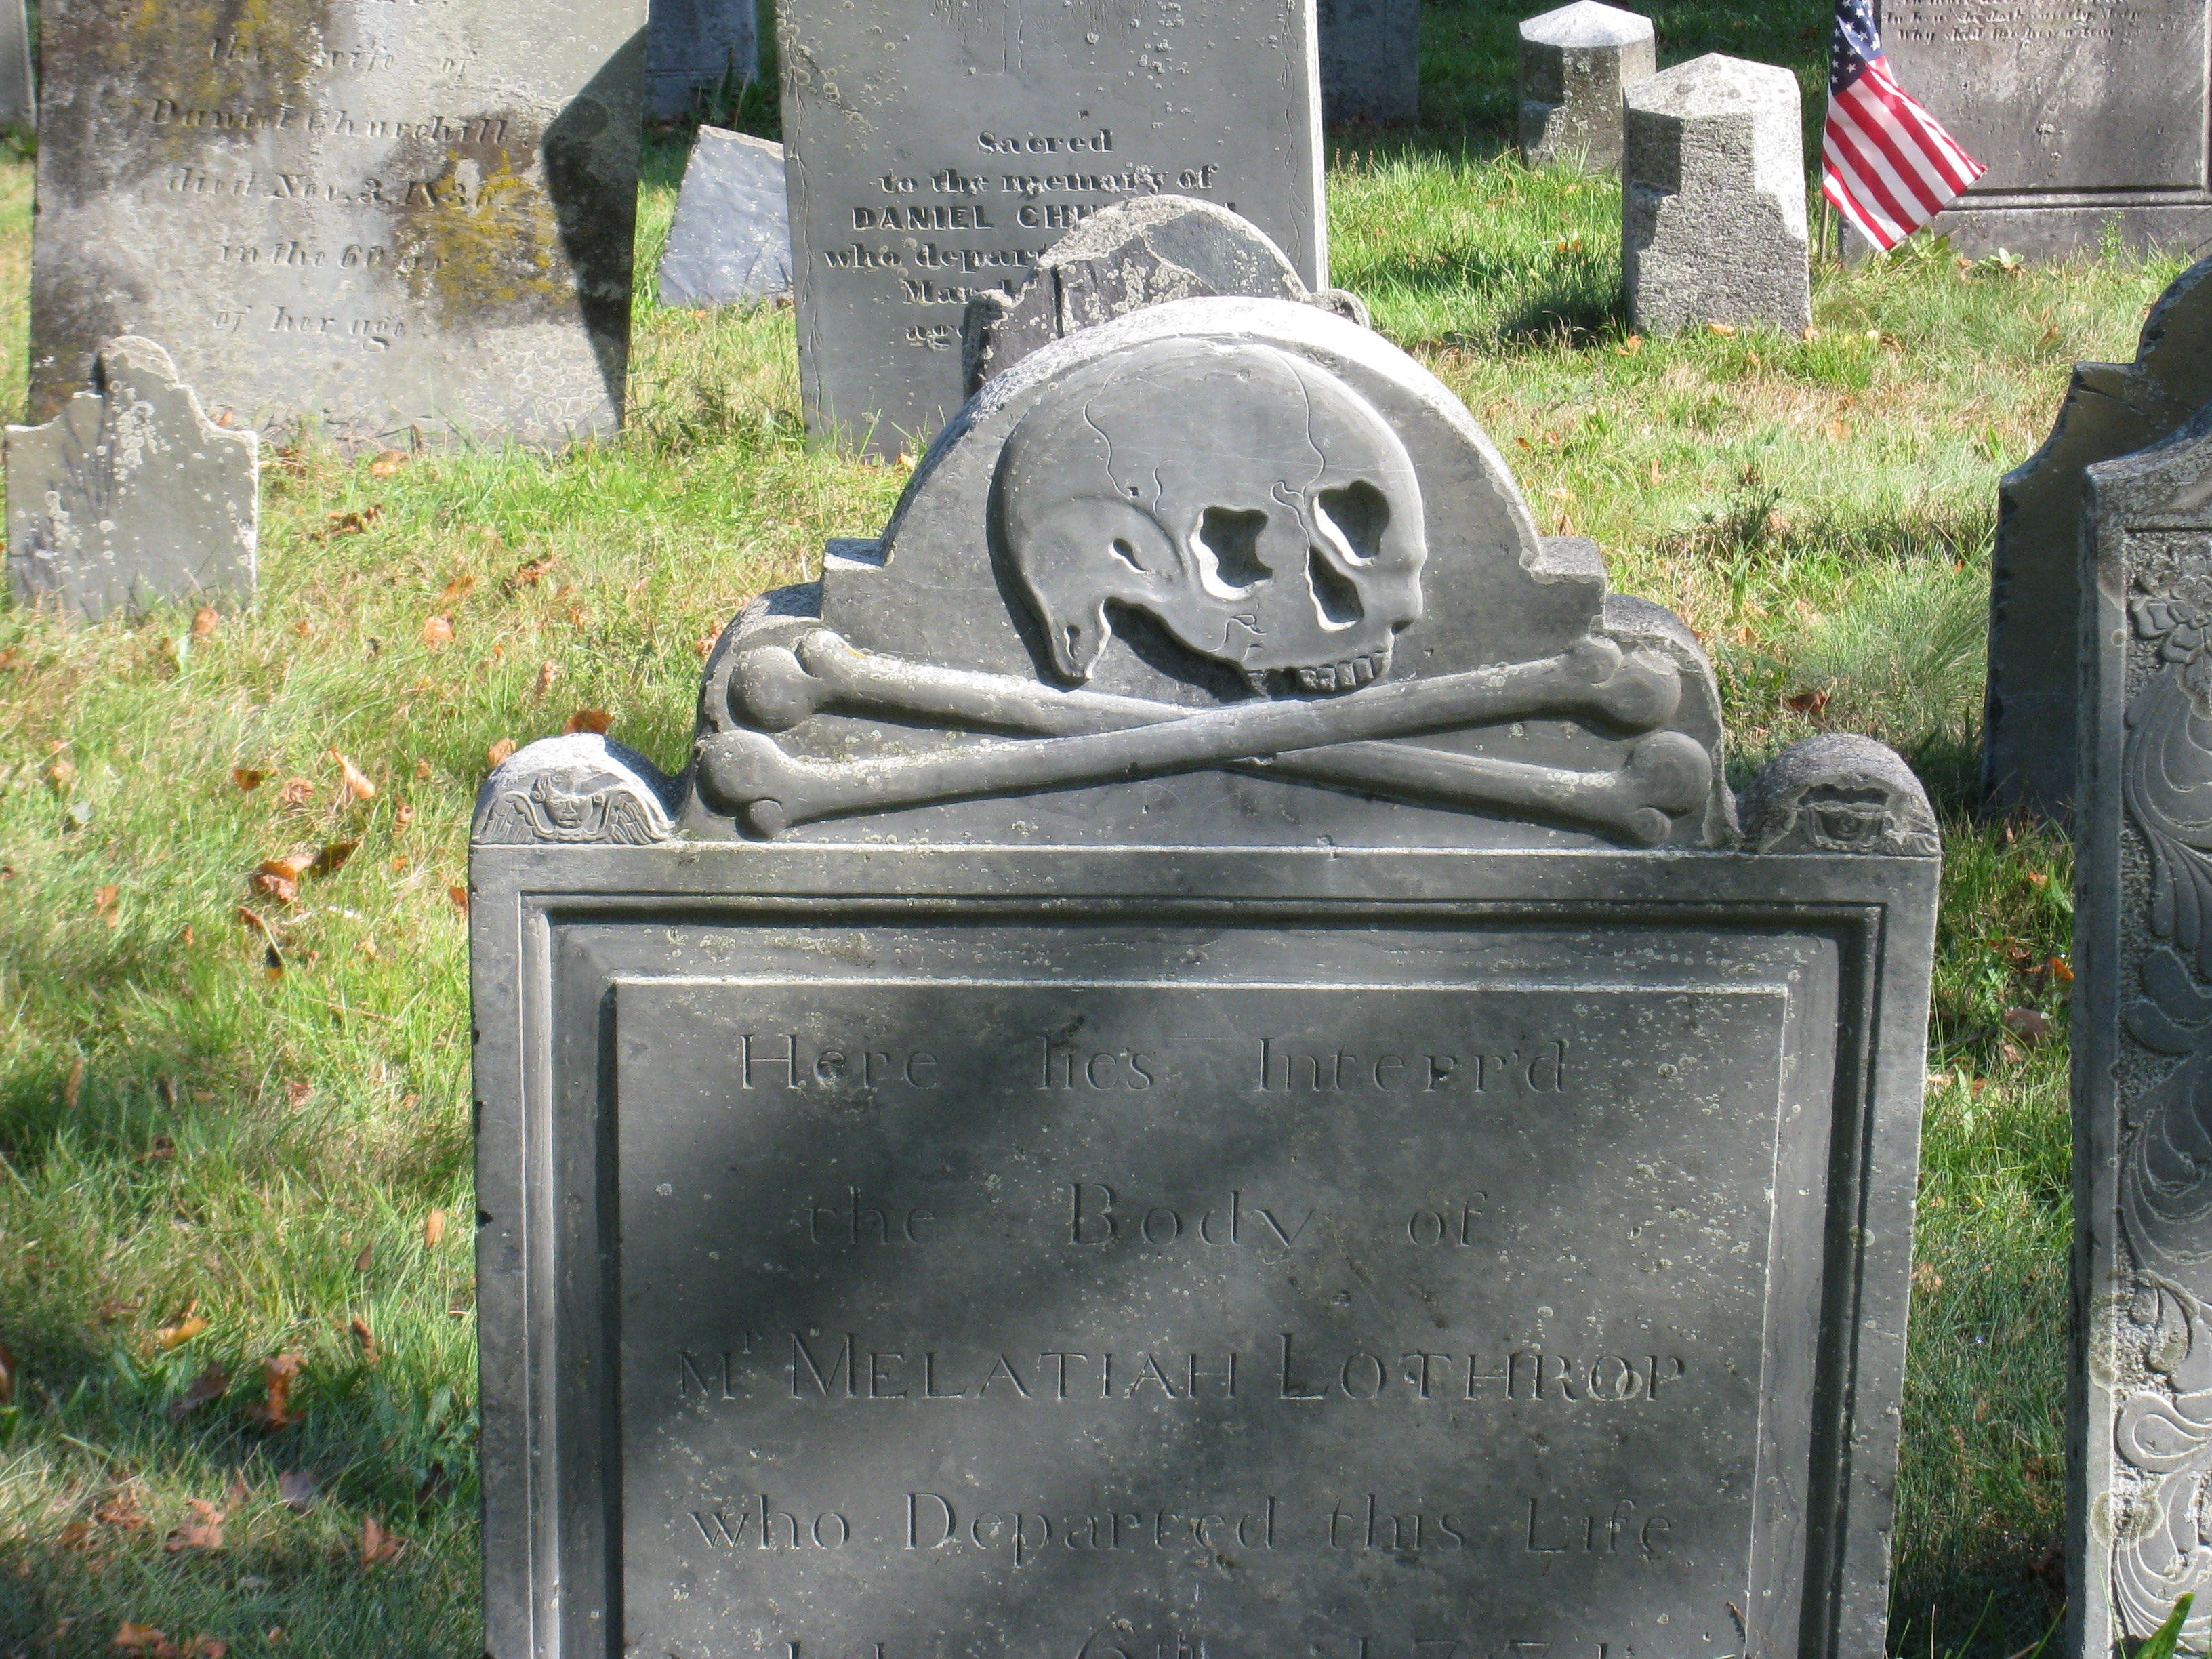 Gravestone at Burial Hill Cemetery - Plymouth, Mass.